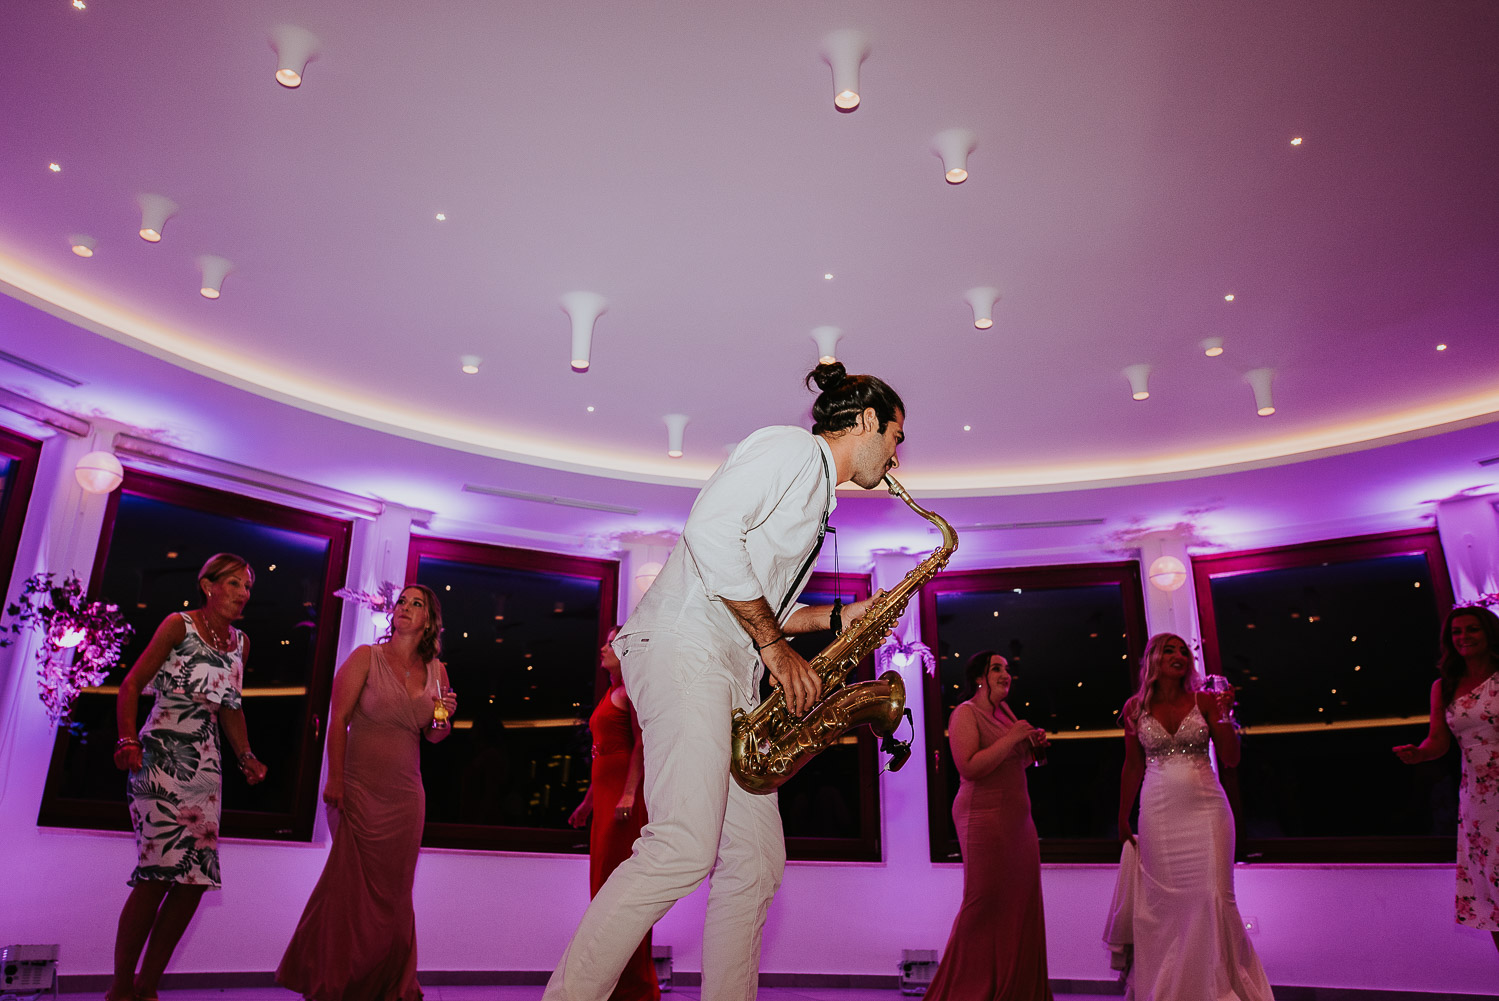 Wedding photographer Santorini: sax player surrounded by the guests on the dance floor by Ben and Vesna.